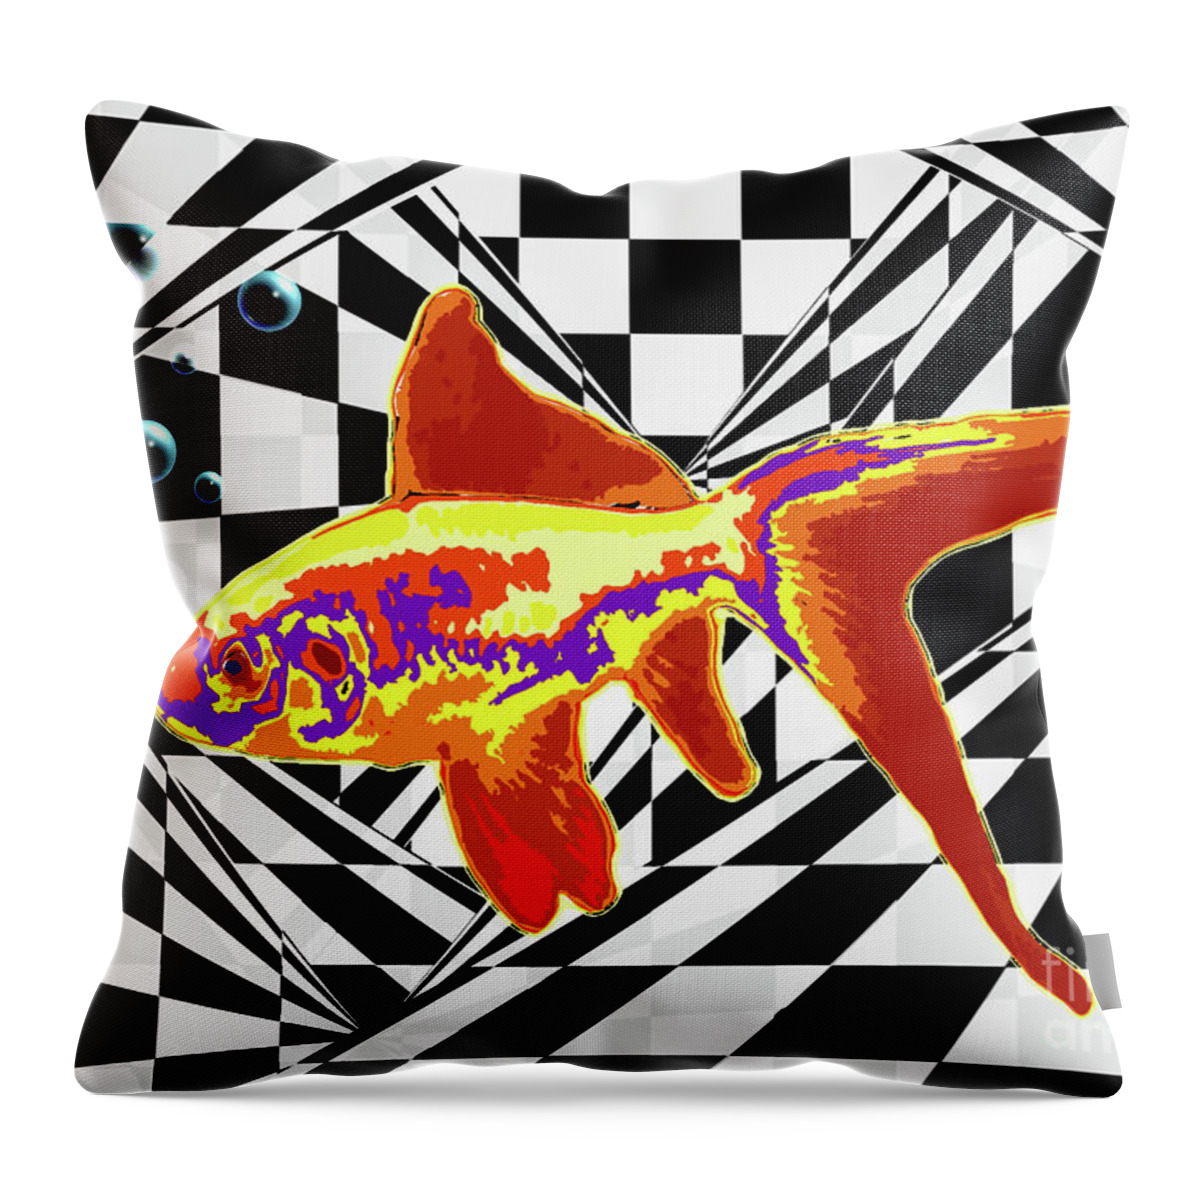 Abstract Throw Pillow featuring the digital art The Fish by Bruce Rolff